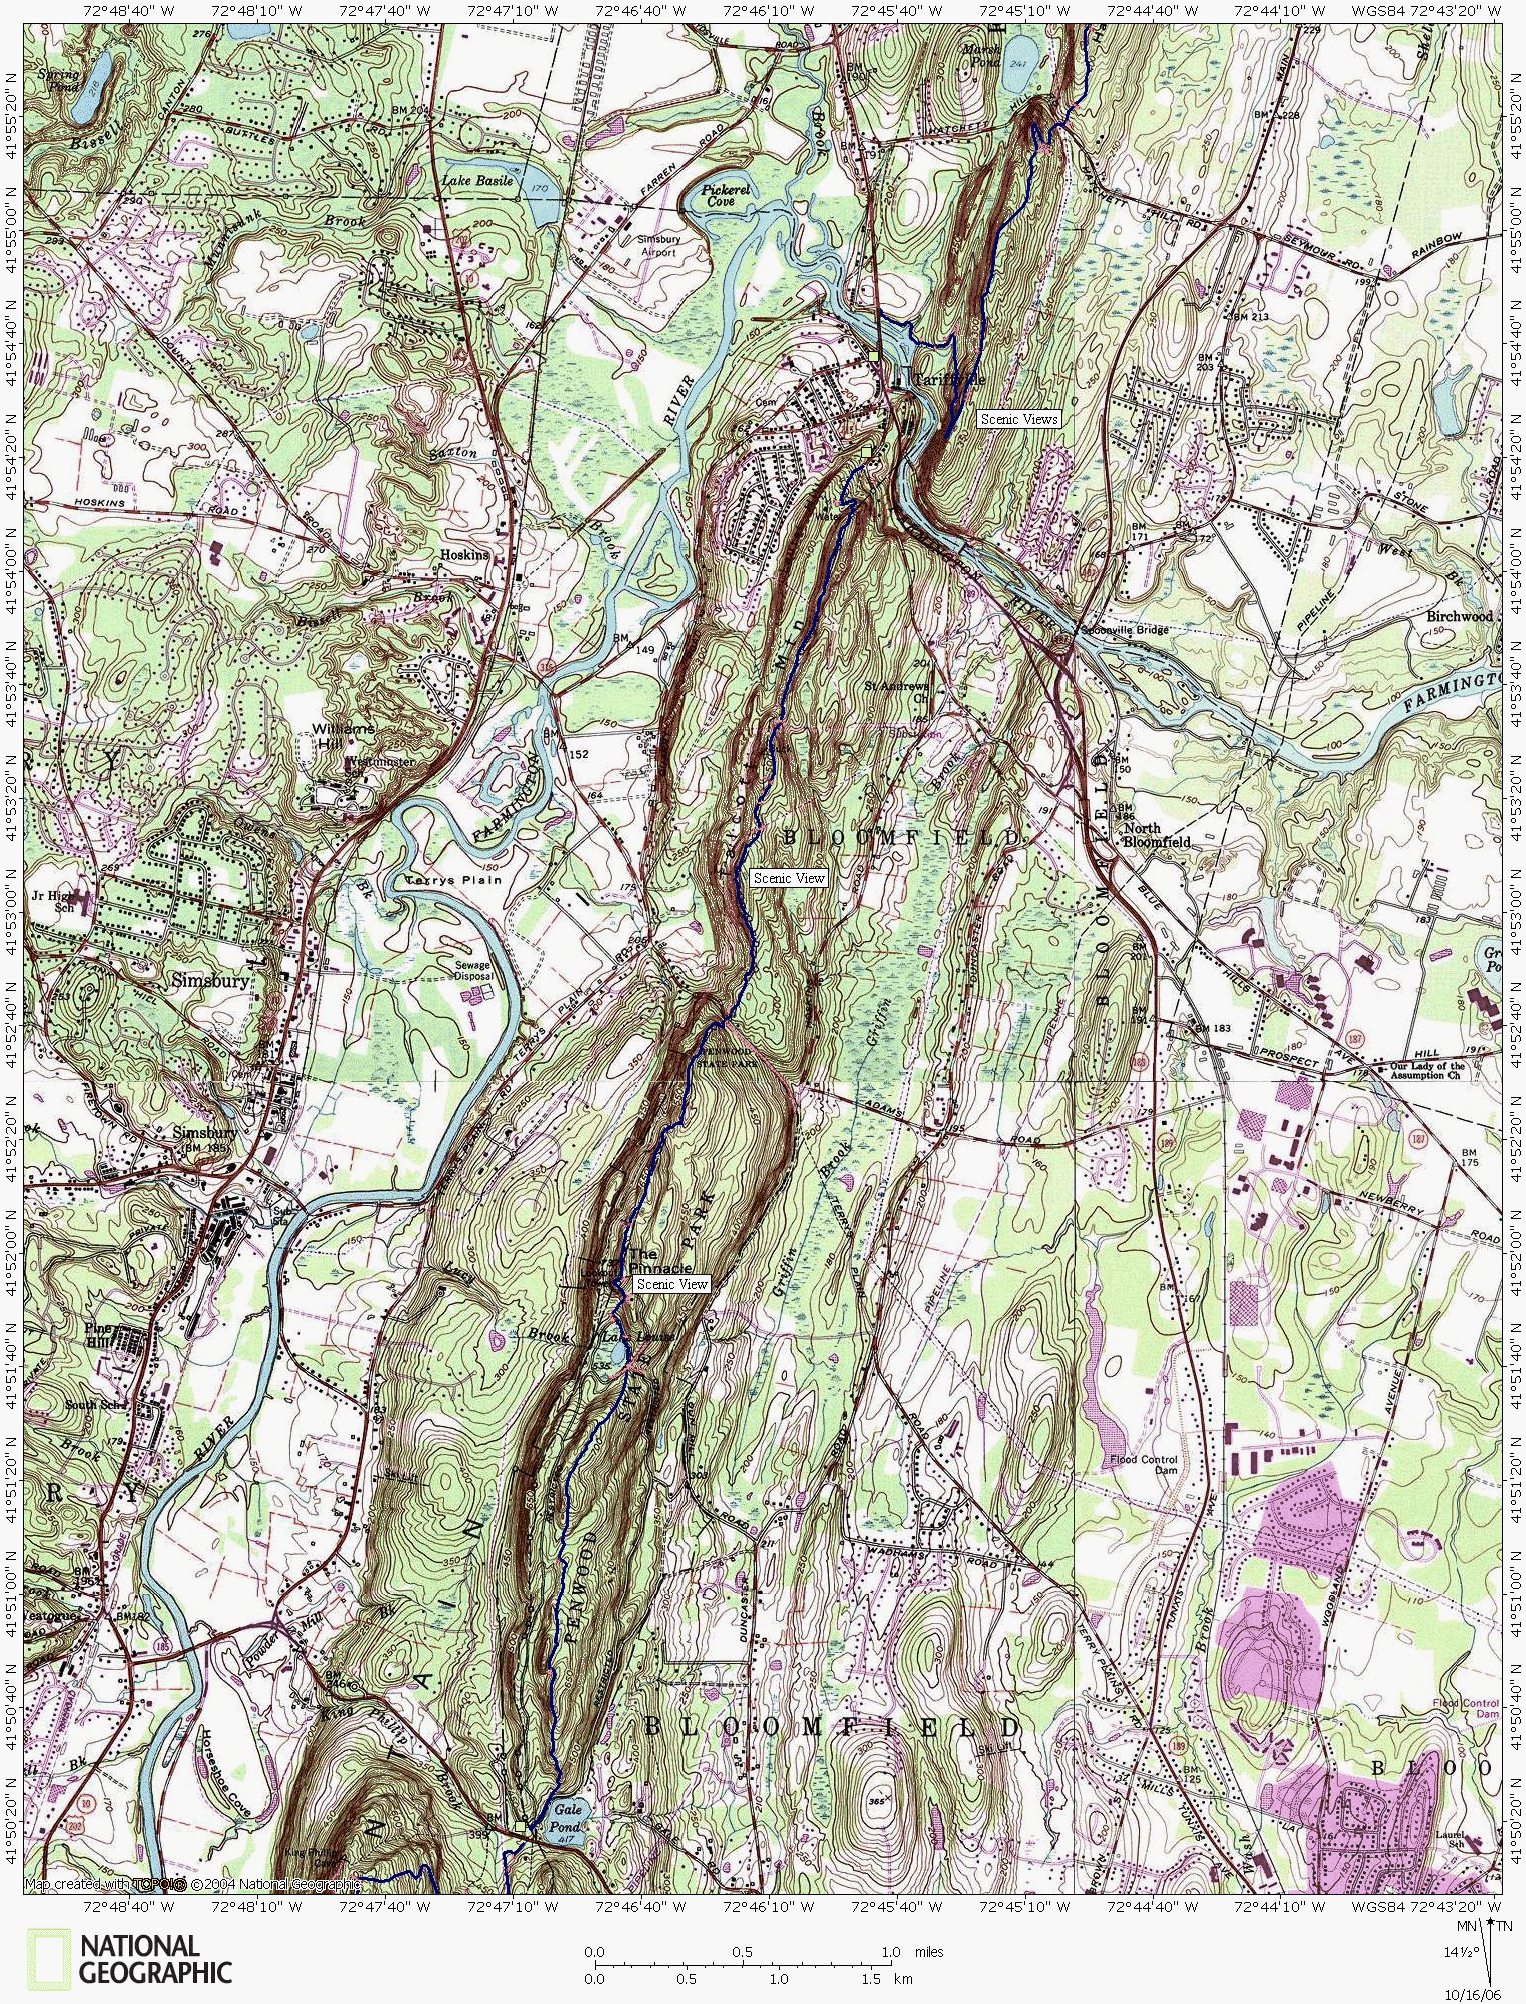 Connecticut, Metacomet, Map, Hiking, Backpacking, Trail, Penwood State Park